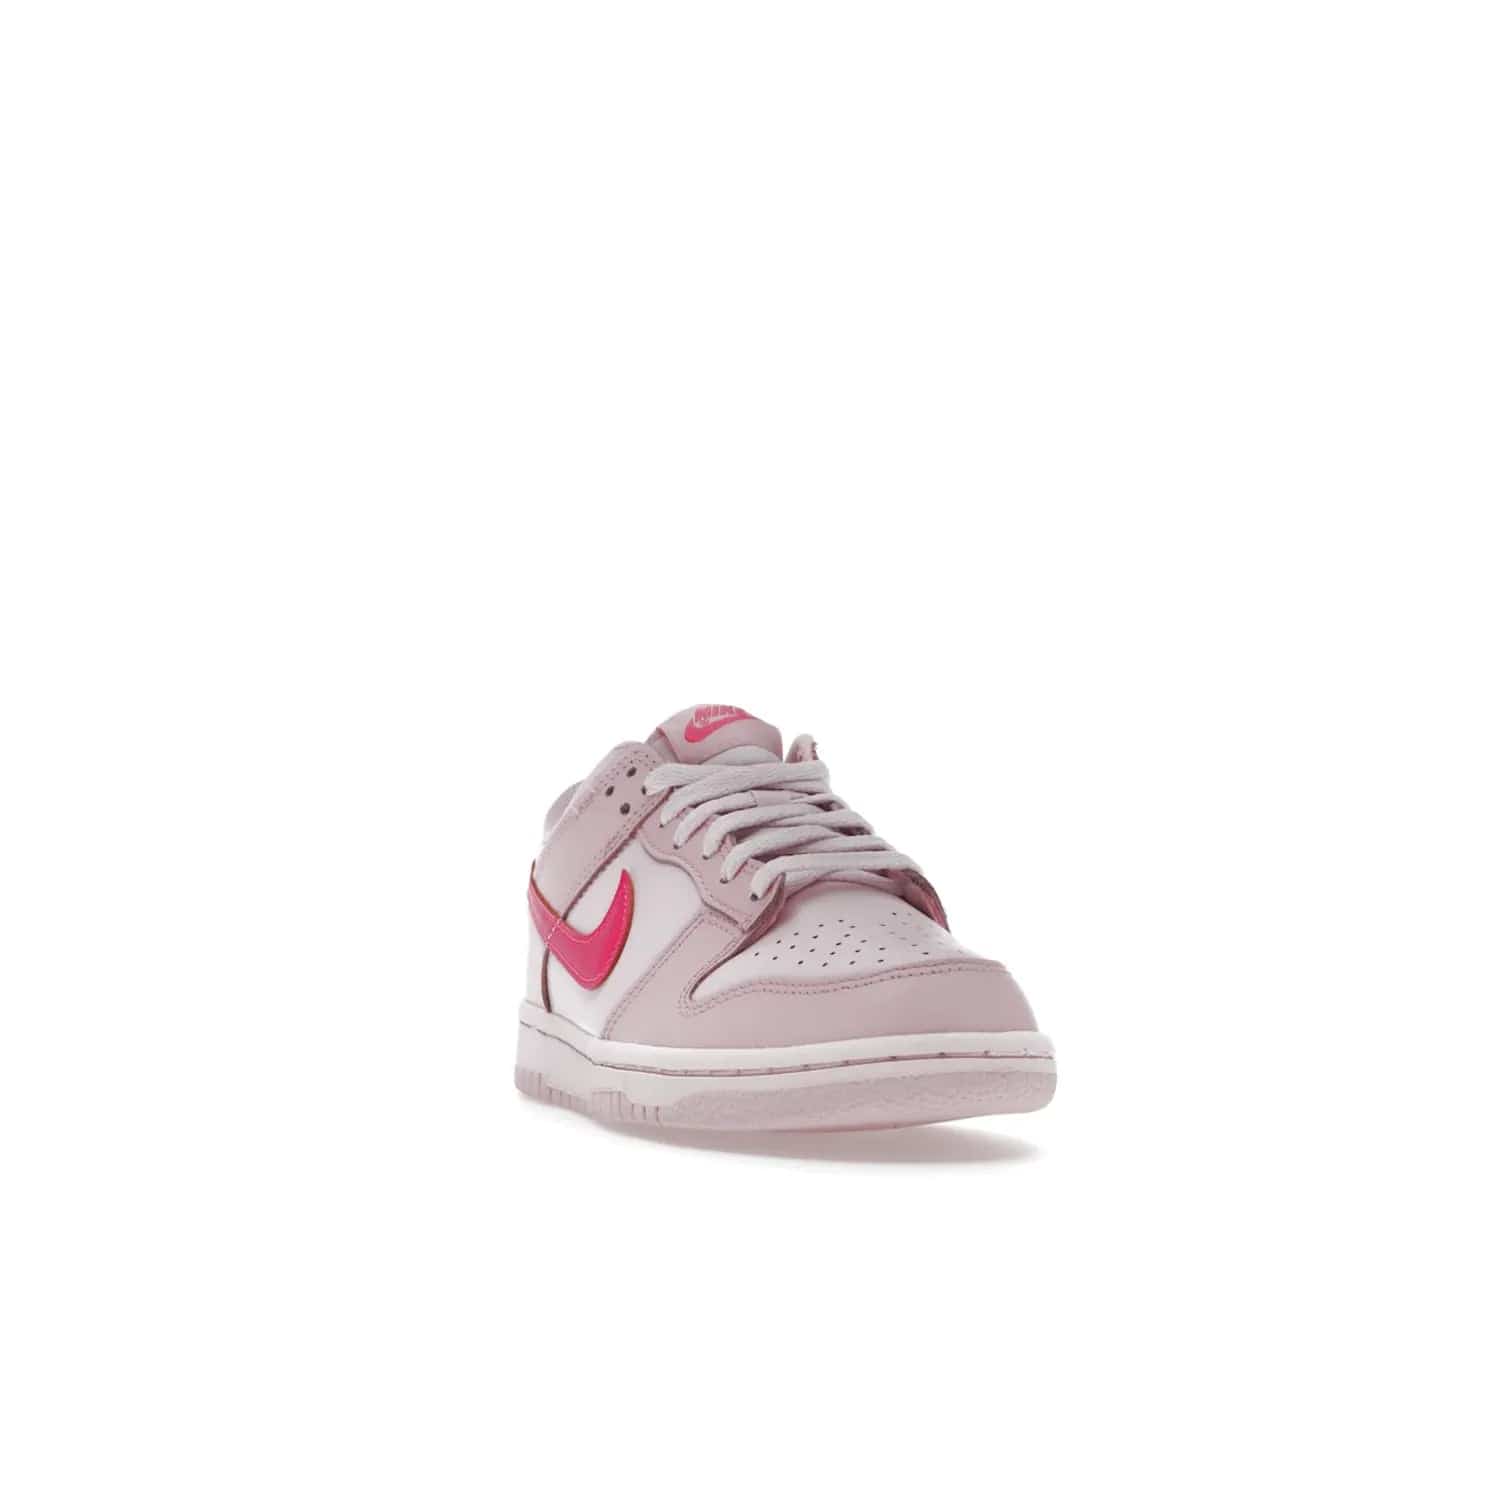 Nike Dunk Low Triple Pink (GS) - Image 8 - Only at www.BallersClubKickz.com - The Nike Dunk Low Triple Pink provides bold style in GS sizing. Featuring 3 distinct shades of pink and Nike branding, the shoe stands out.